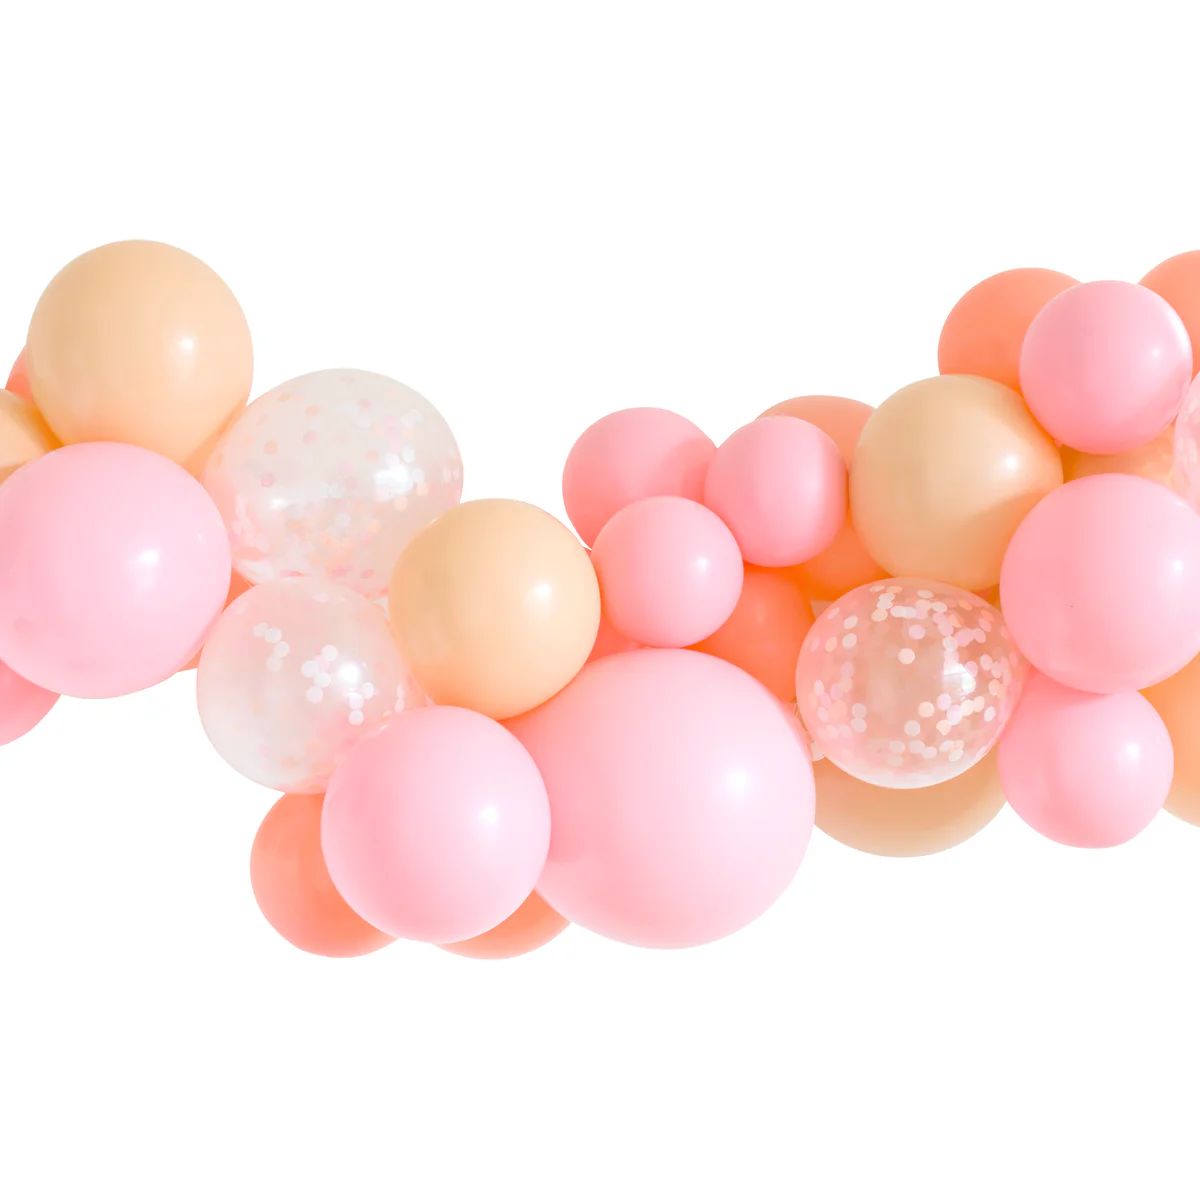 Candy Balloon Garland | Ellie and Piper